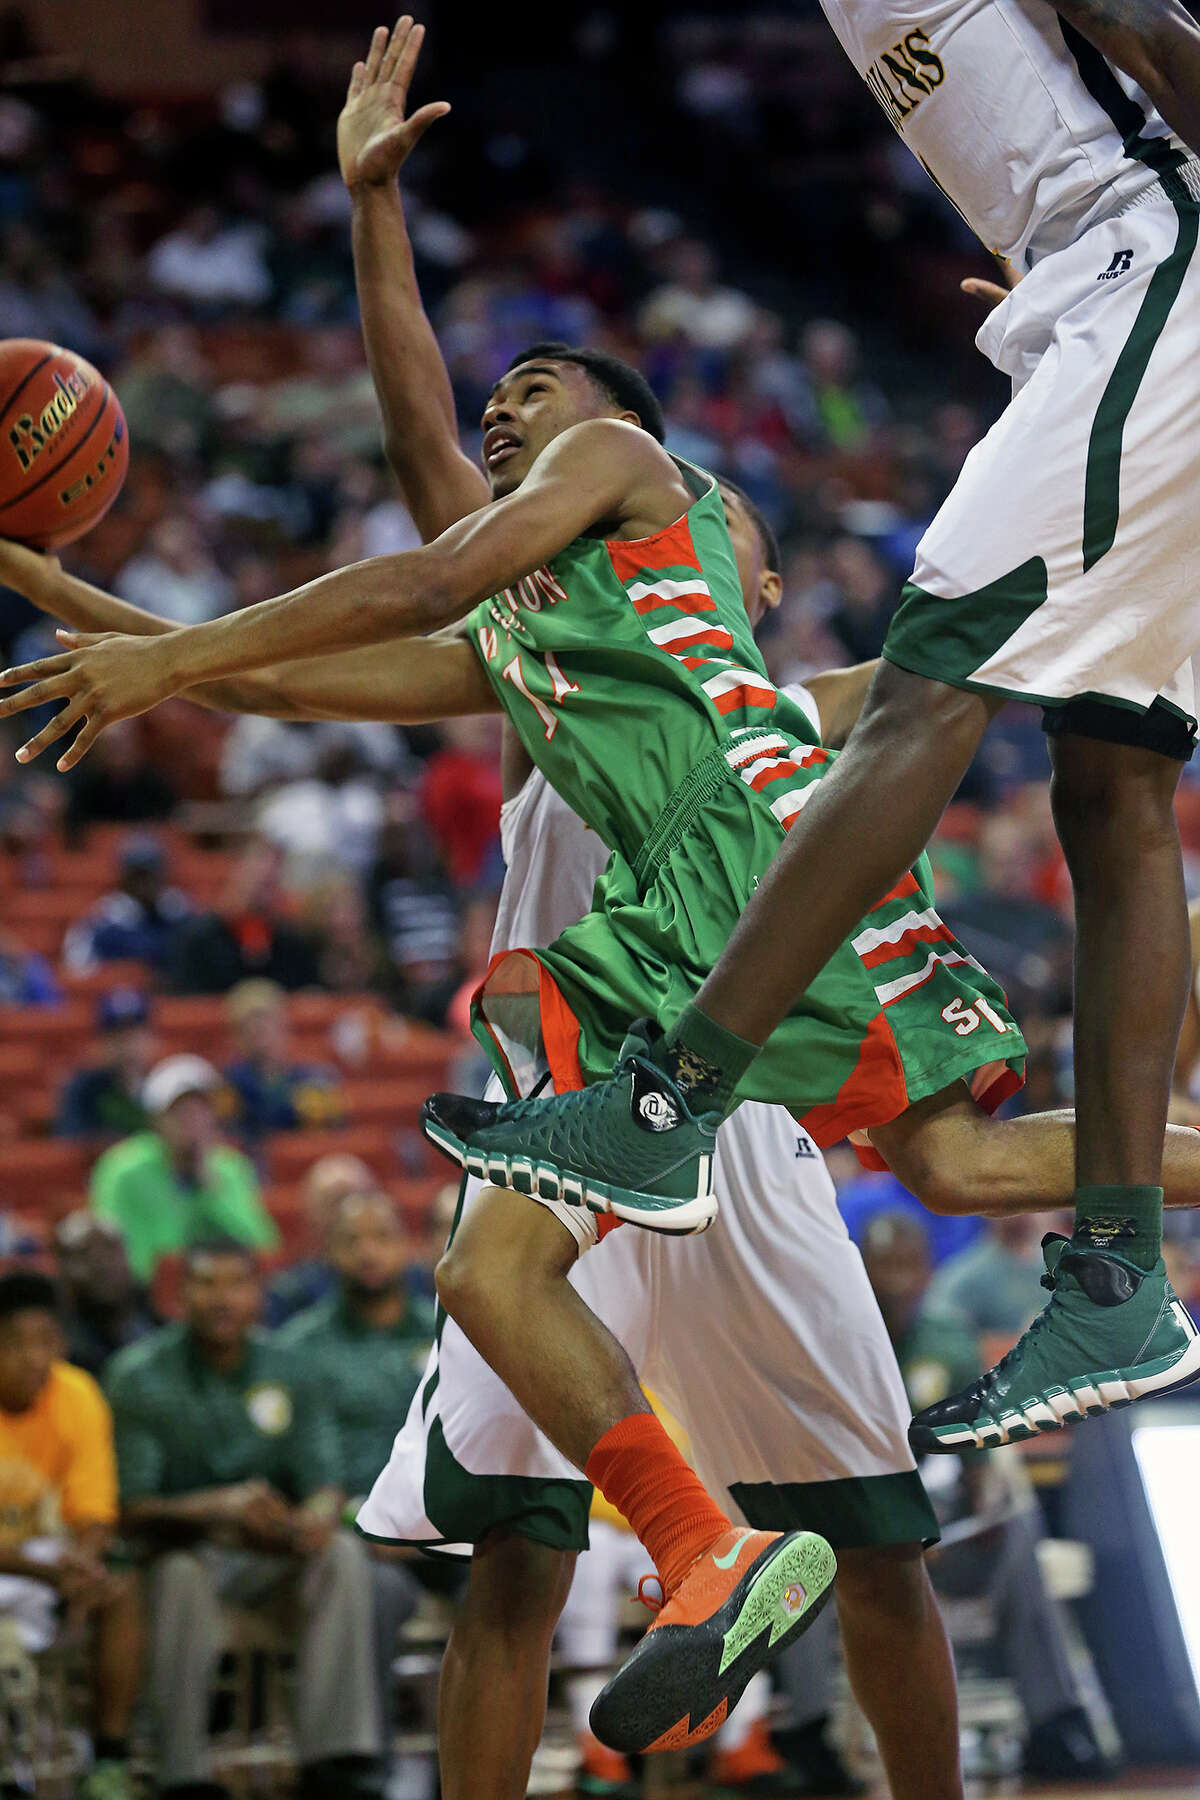 Jawon Anderson tries an off balance runner against heavy pressure as Sam Houston plays Dallas Madison at the Erwin Center in Austin in the state semifinals for 3A basketball on March 6, 2014.